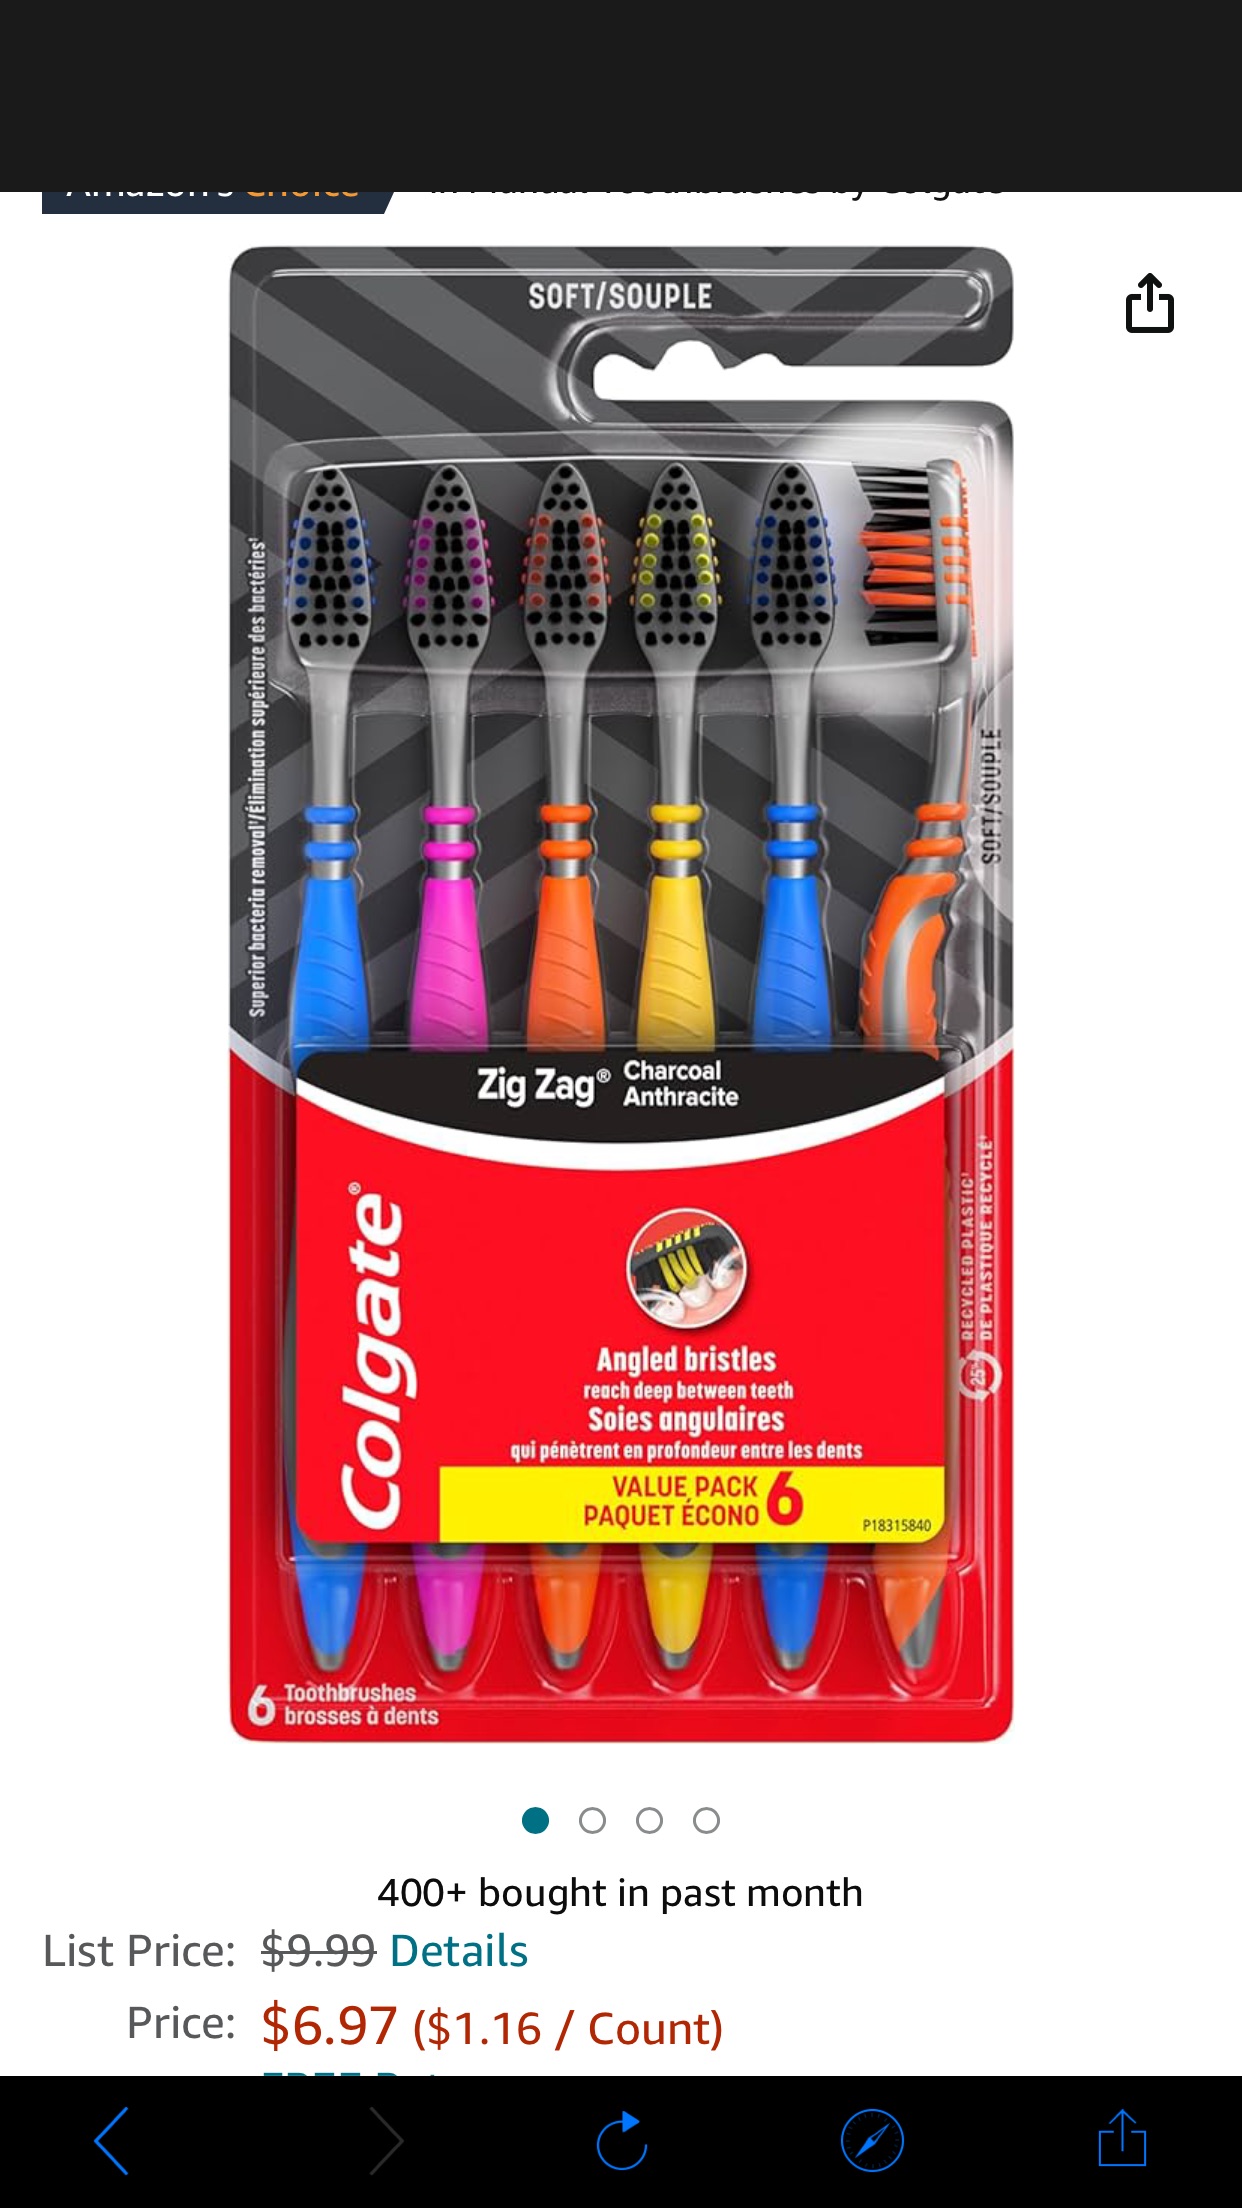 Amazon.com : Colgate Zig Zag Charcoal Toothbrush, Adult Soft Toothbrushes, 6 Pack